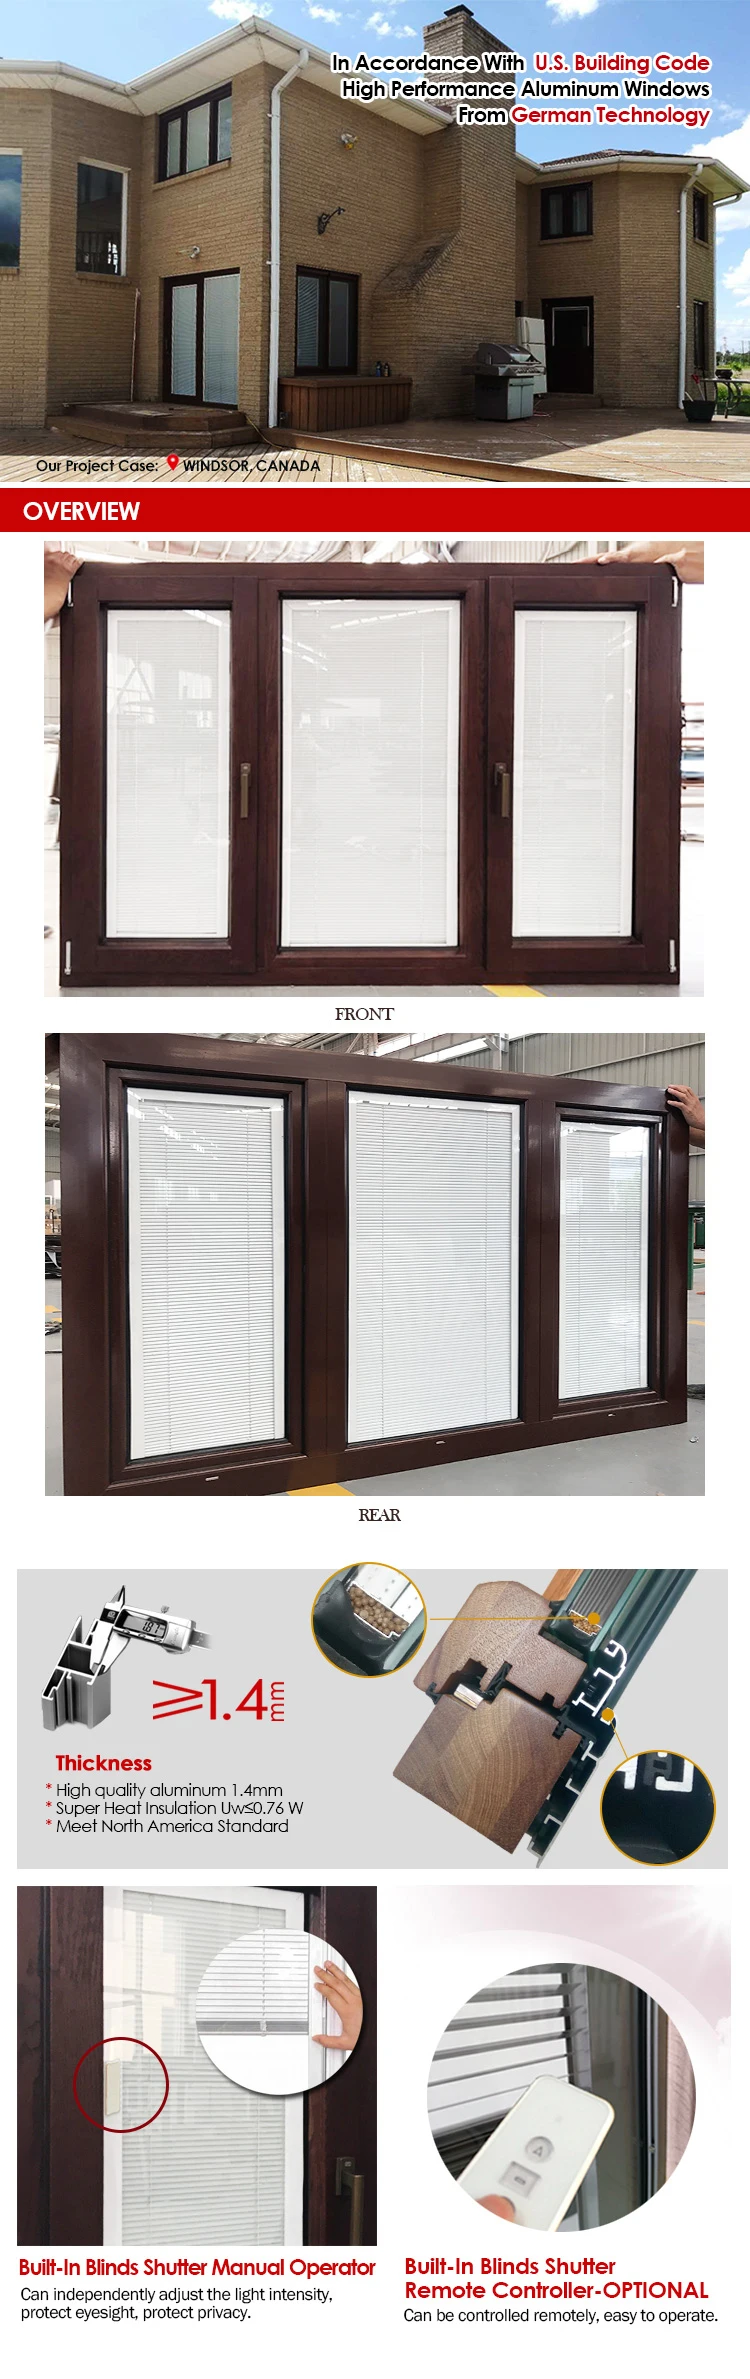 Doorwin Made To Measure Timber Aluminum Clading Two Opening Ways Tilt And Turn Casement Windows With Built-In Blinds for House